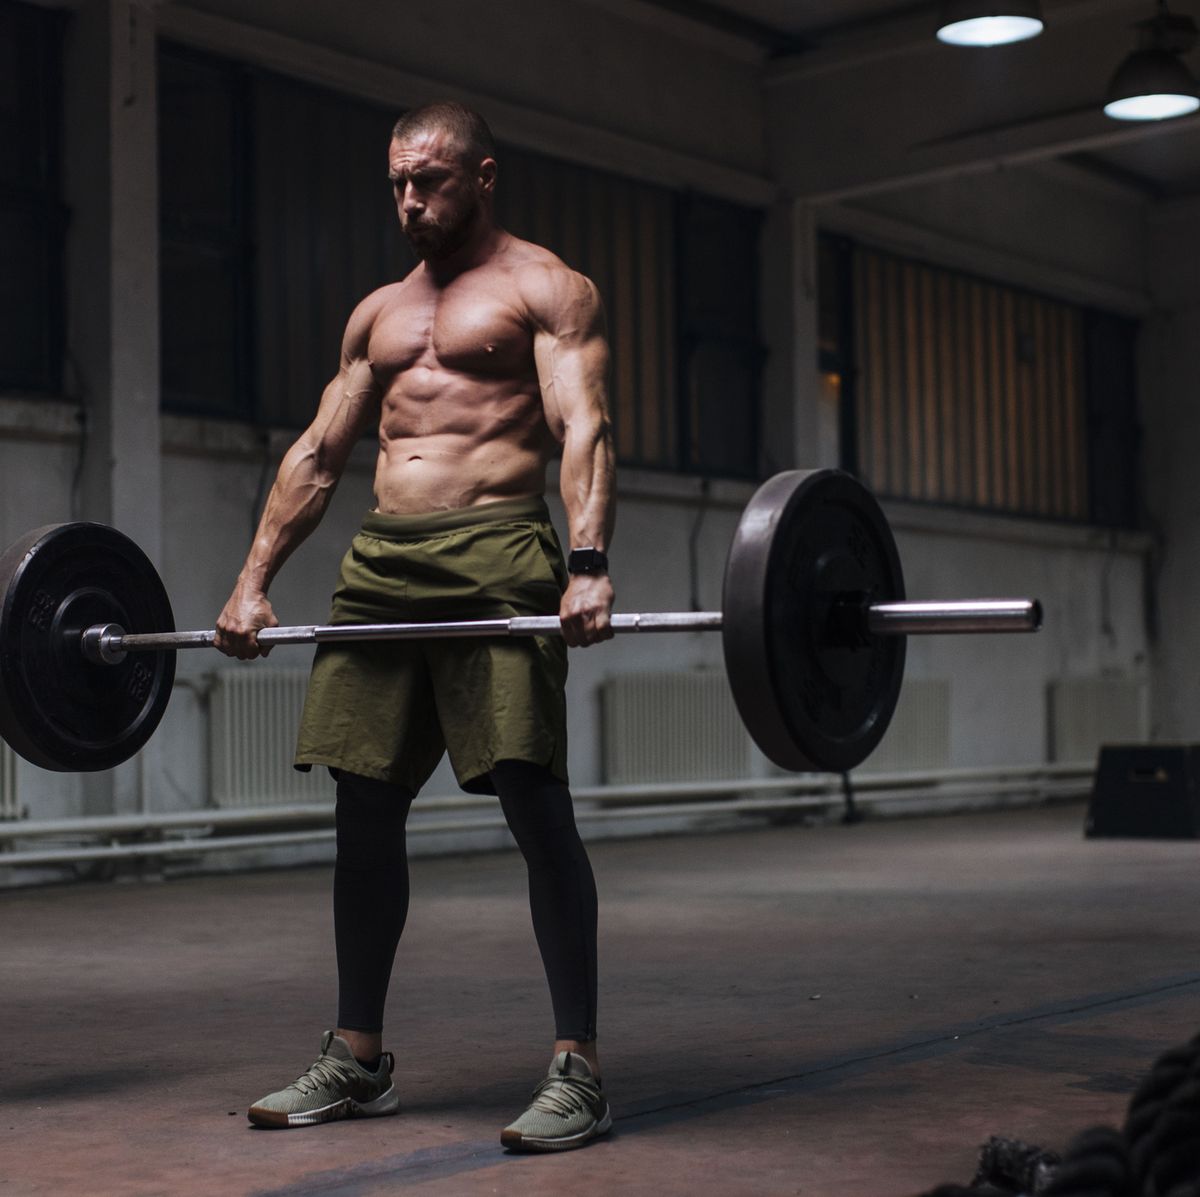 Ask The Super Strong Guy: For Max Gains, Do Low Reps Go First Or Last?